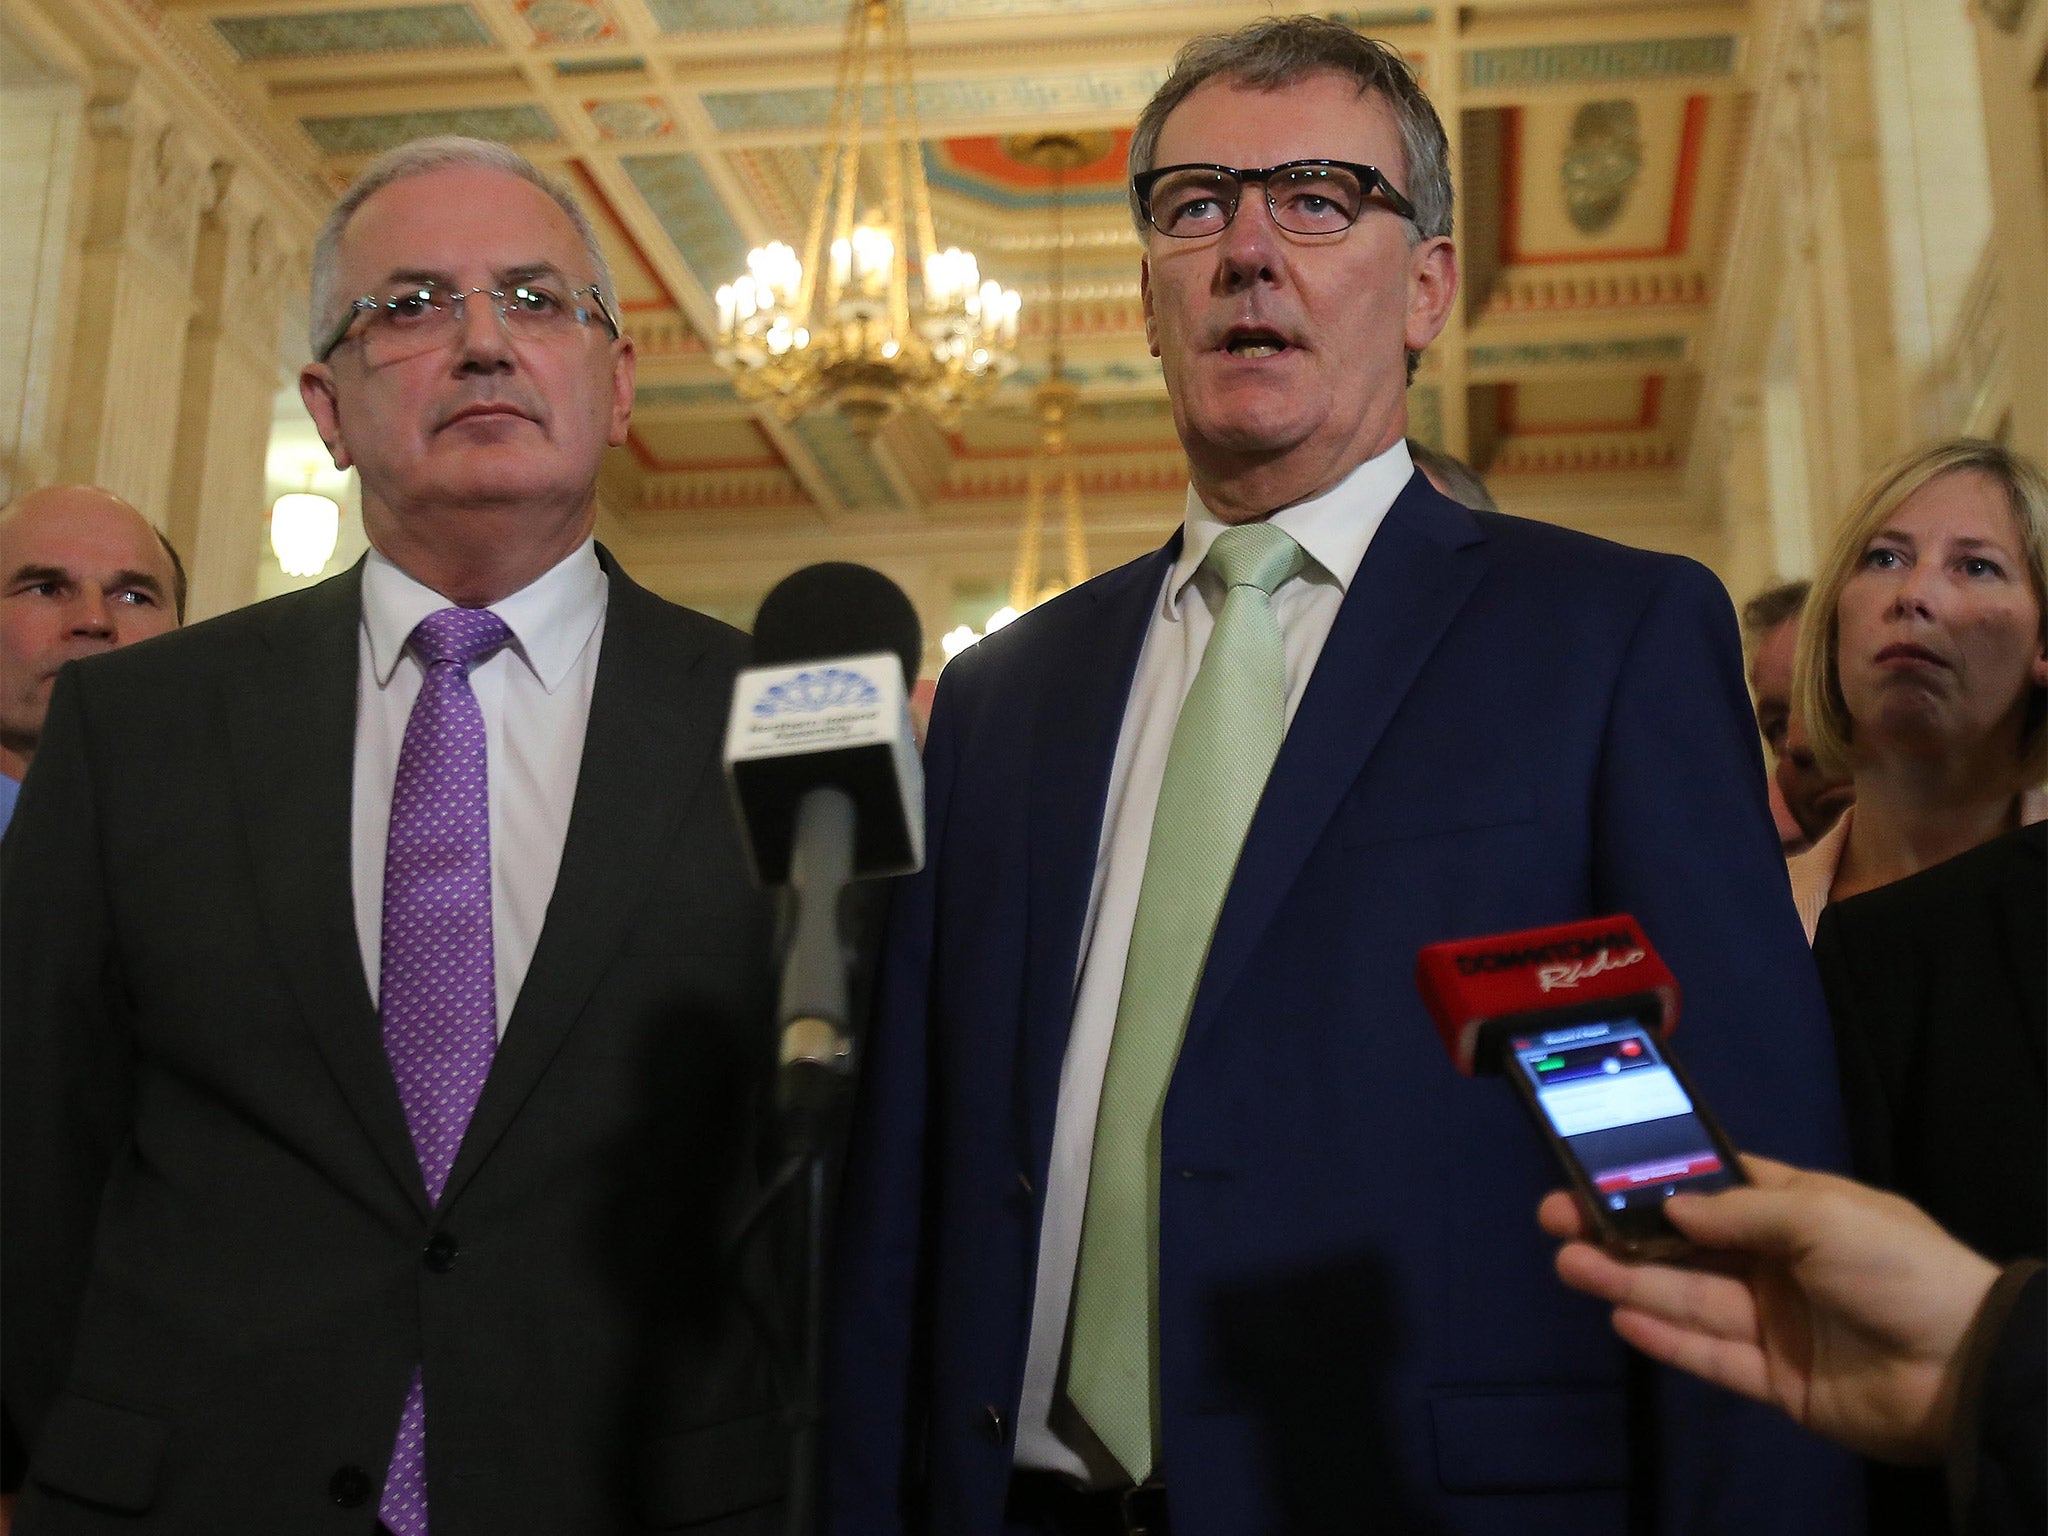 Ulster Unionist Party Leader Mike Nesbitt speaks to the media at Stormont